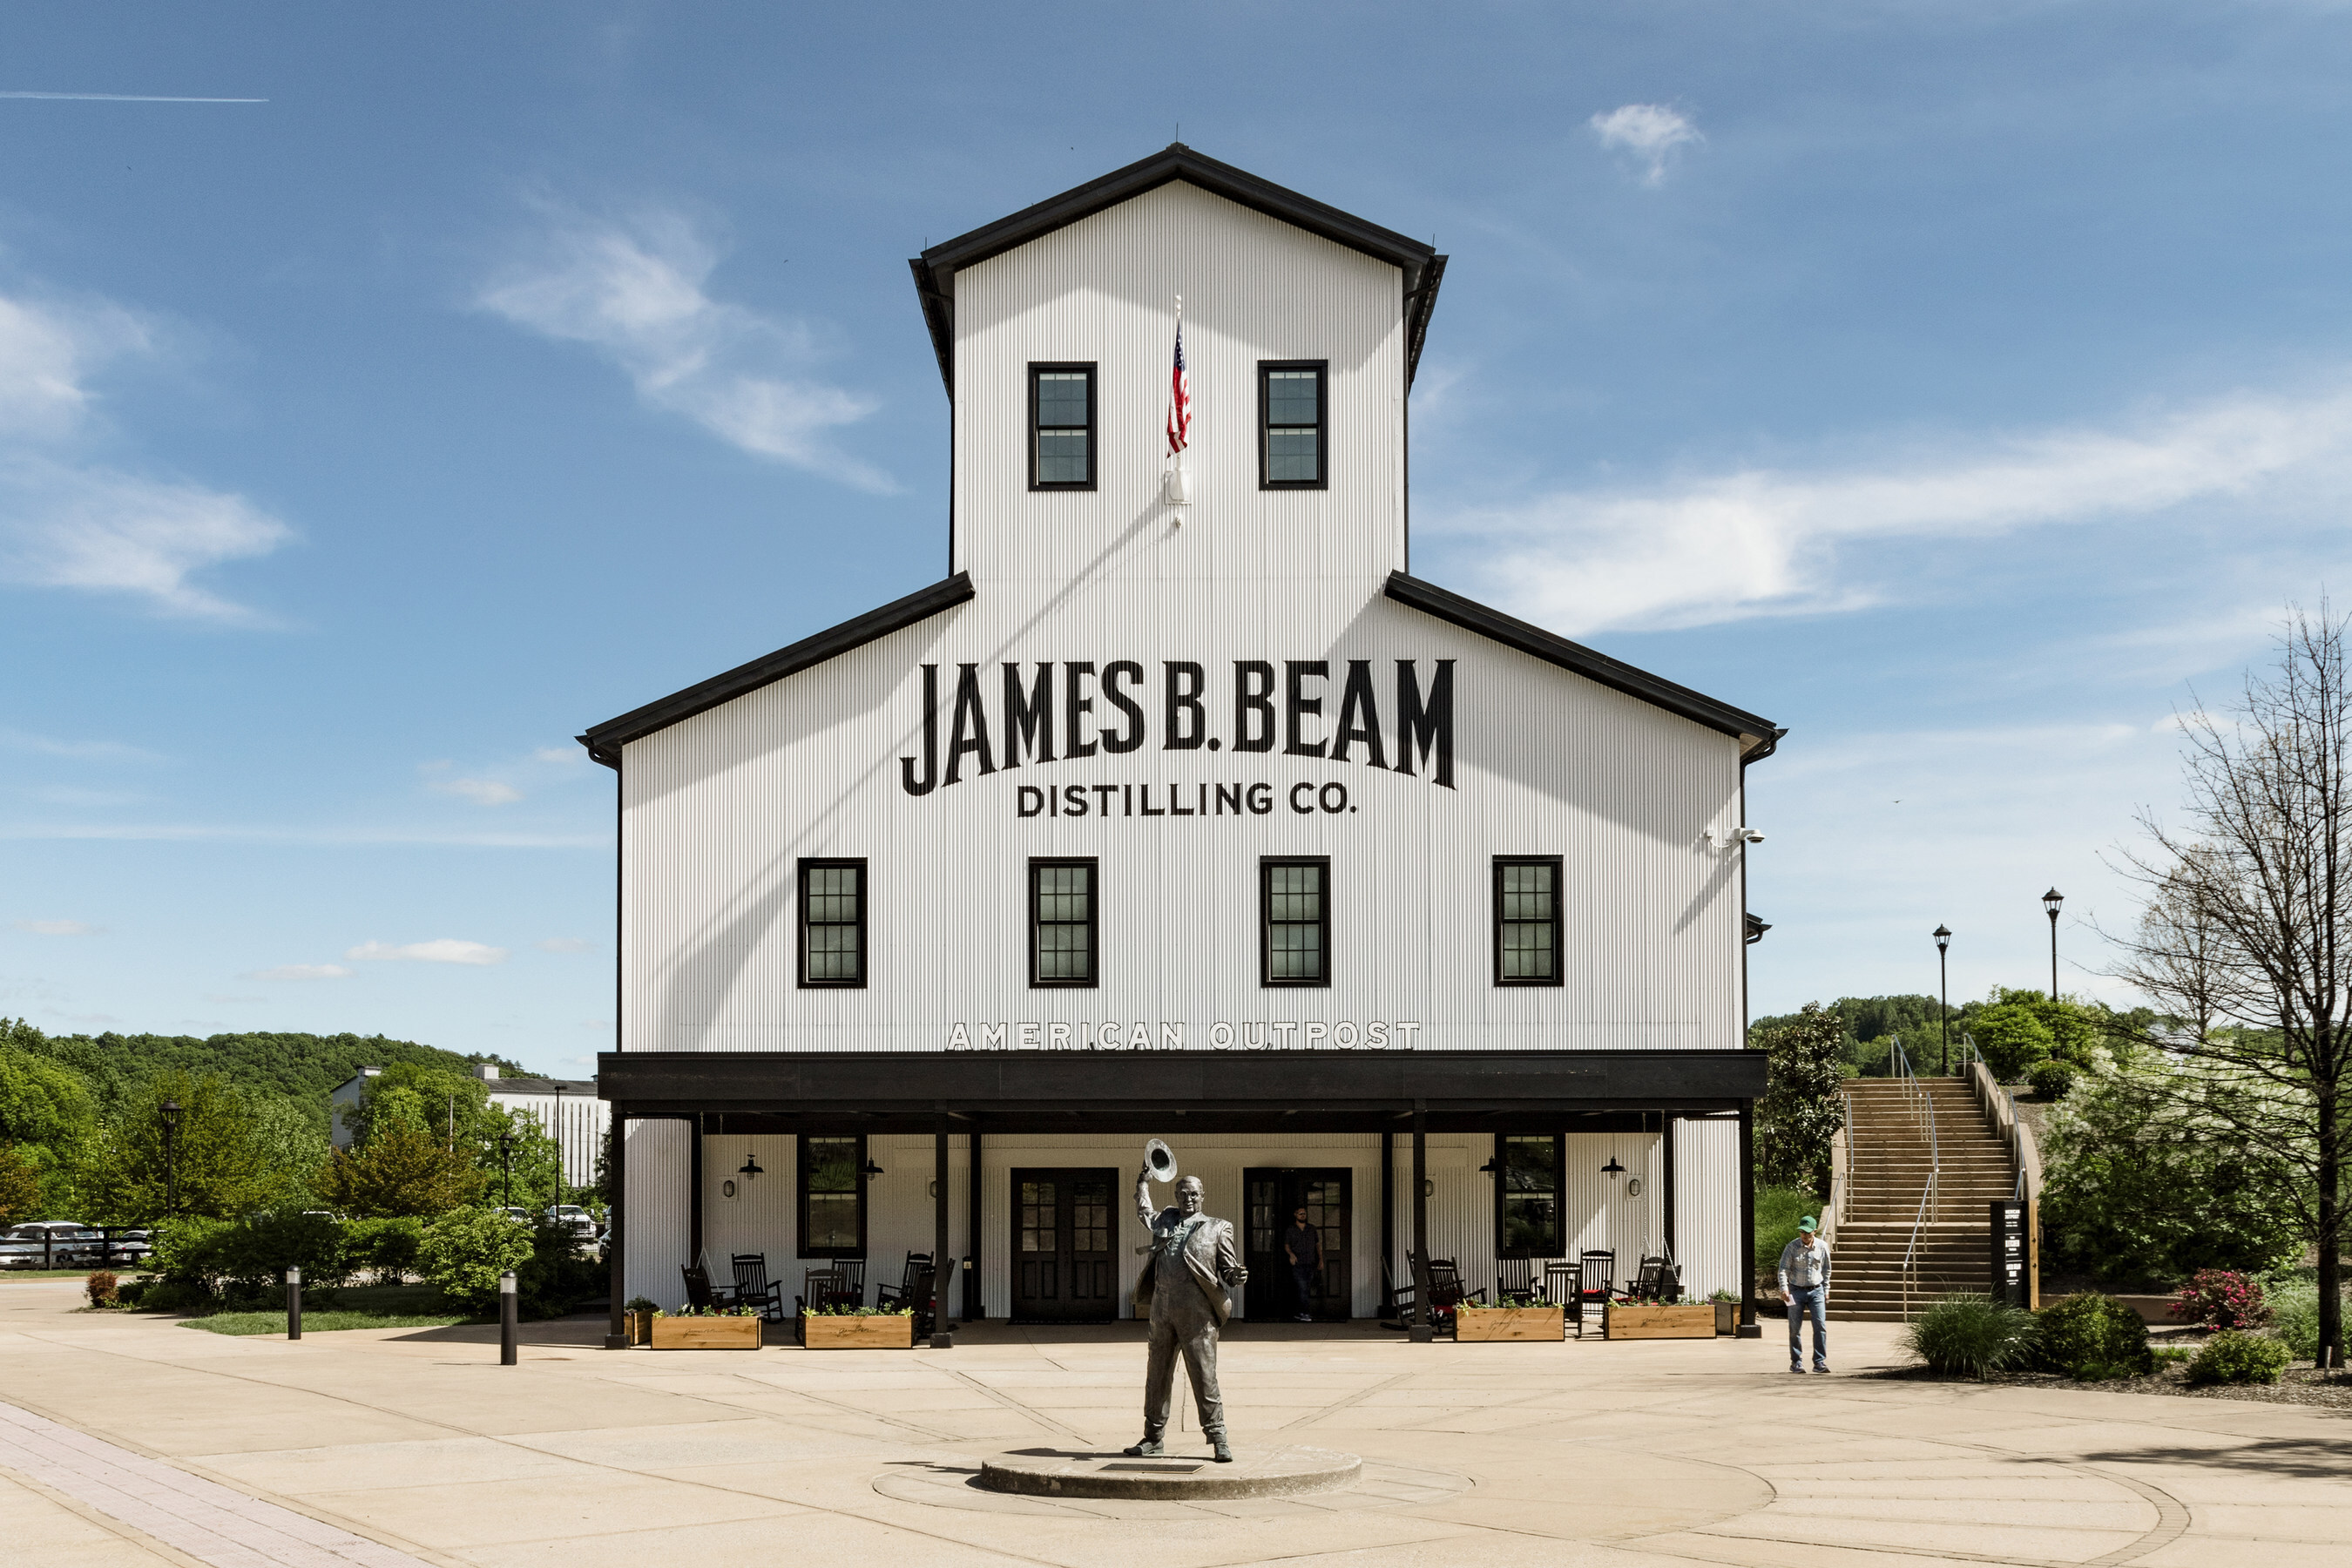 Jim Beam Bourbon is the New, Official Spirit of U.S. Soccer Federation